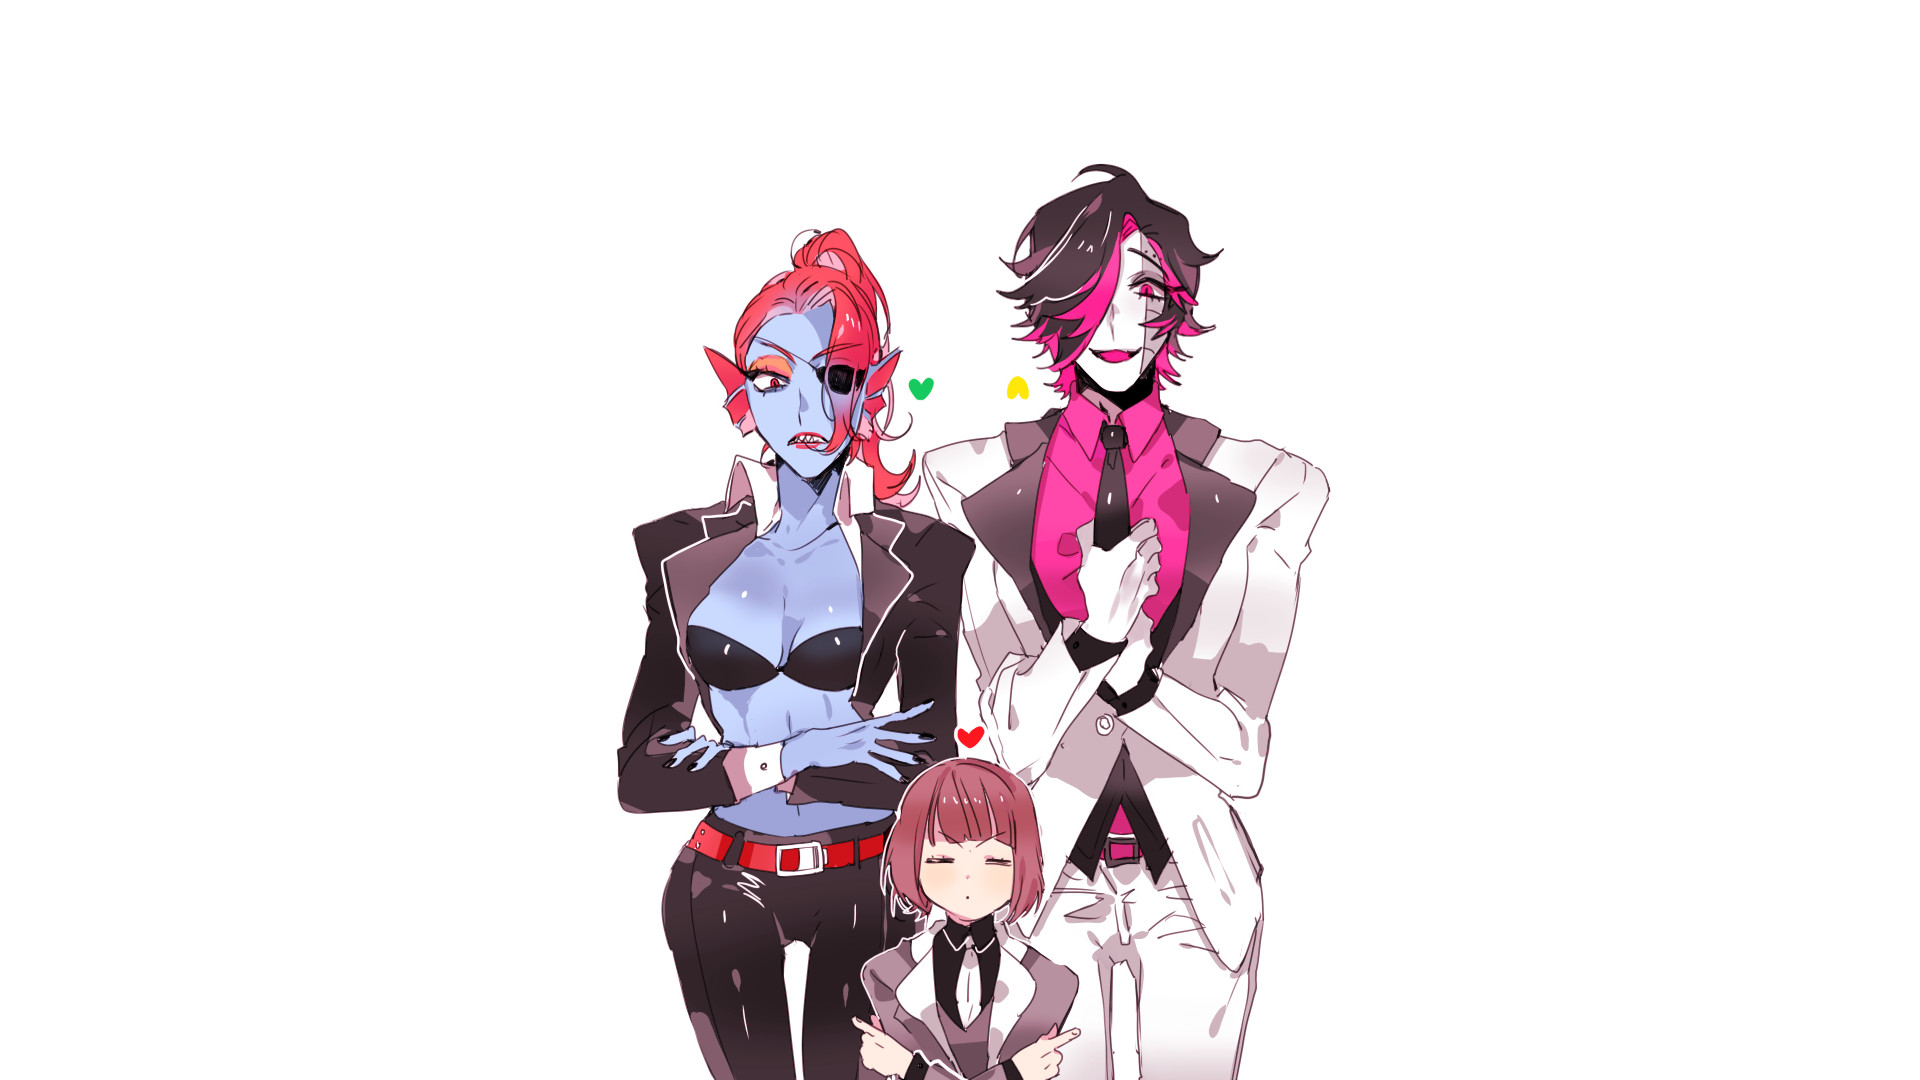 Anime anime Mettaton suits Undertale eye patch anime girls simple background white Undyne